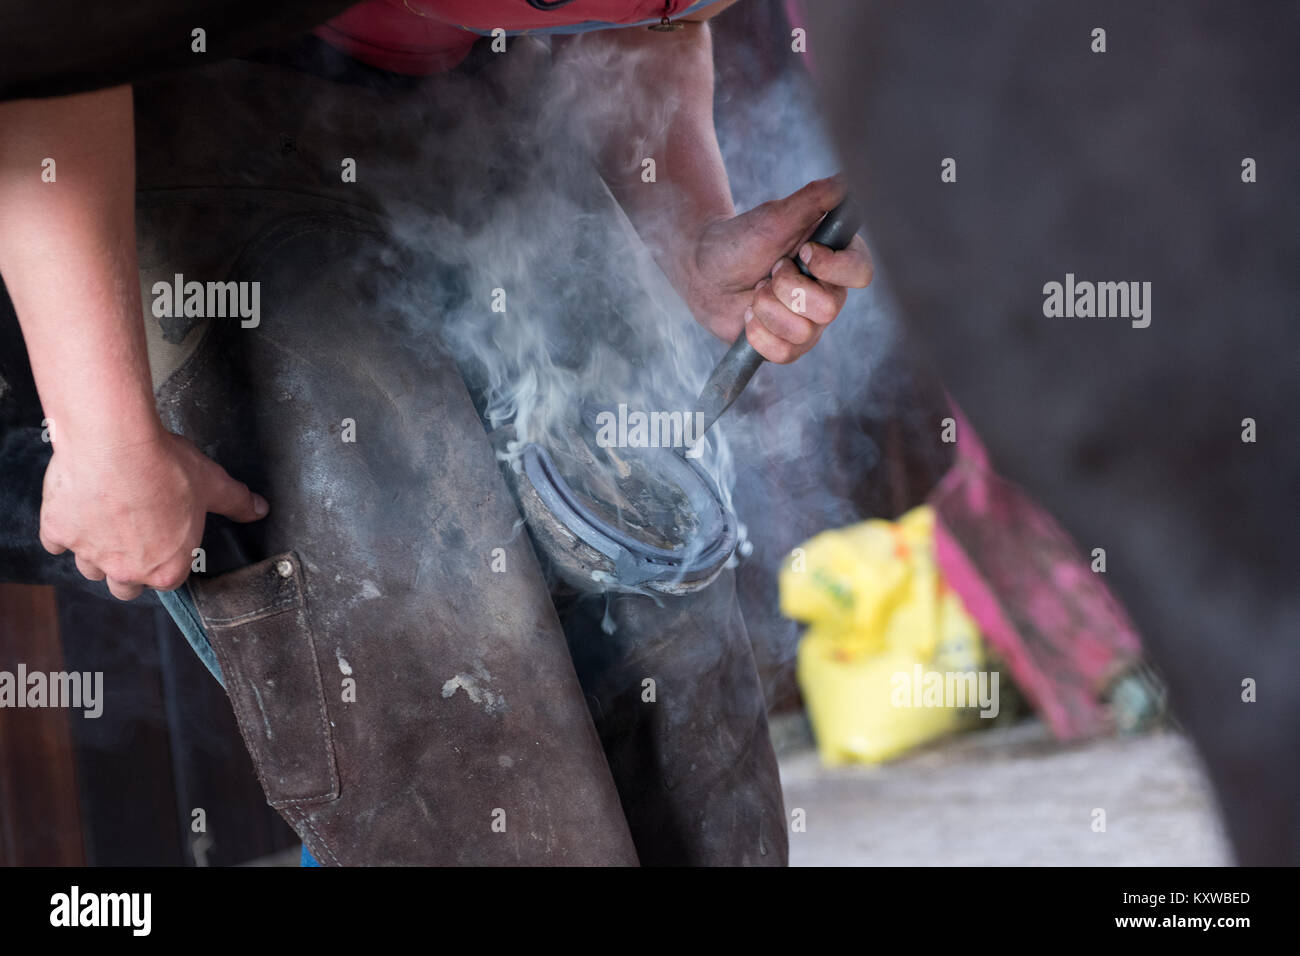 Farrier hot shoeing a horse, North Yorkshire, UK. Stock Photo